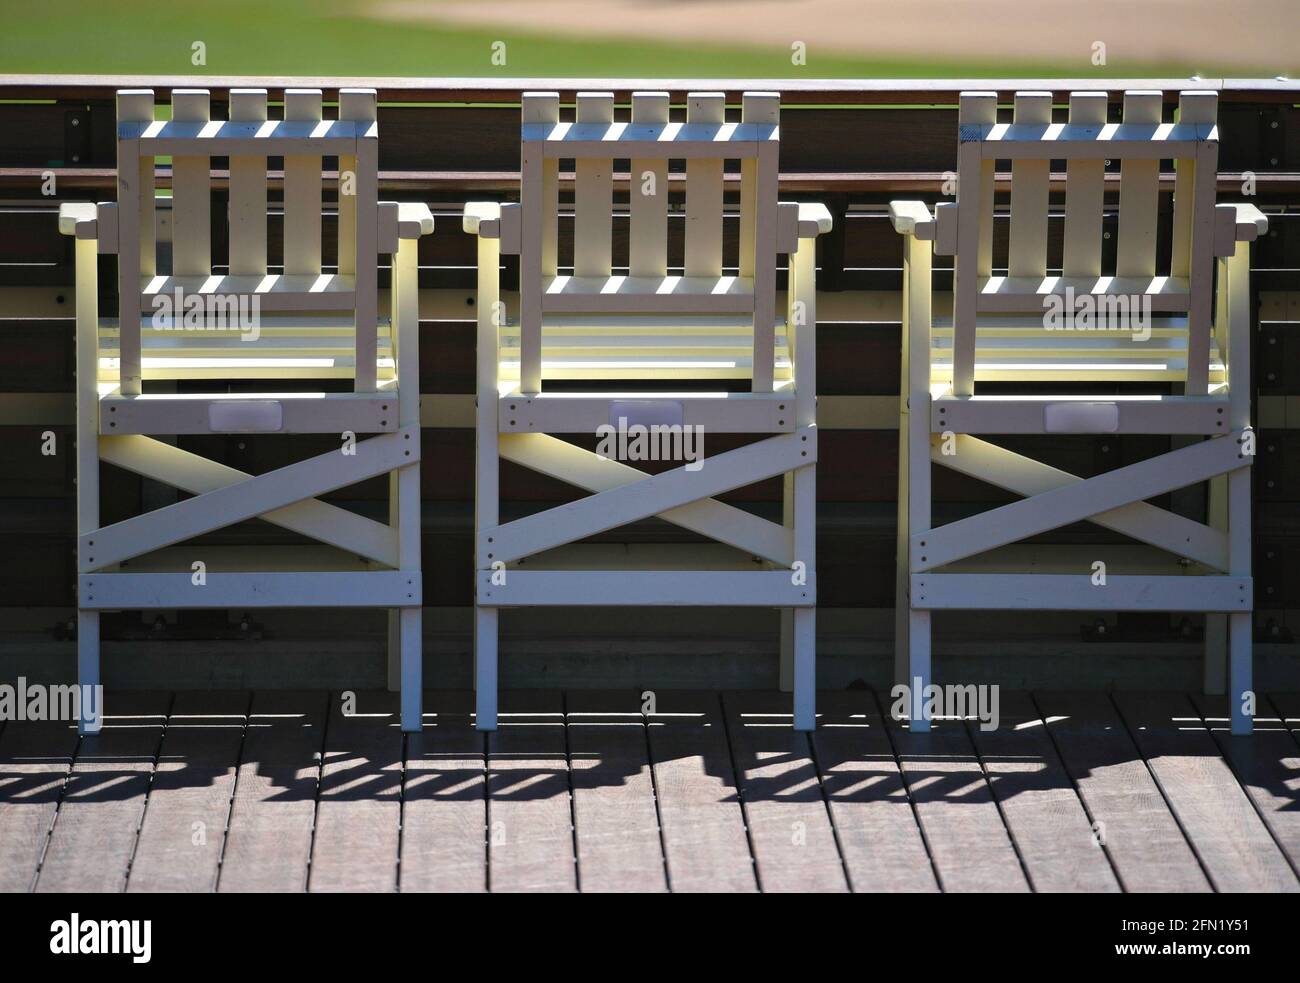 Beach style chairs line the edge of Sun Diego Beach at the right field wall of Petco Park, the Padres Baseball Stadium in San Diego, California USA. Stock Photo